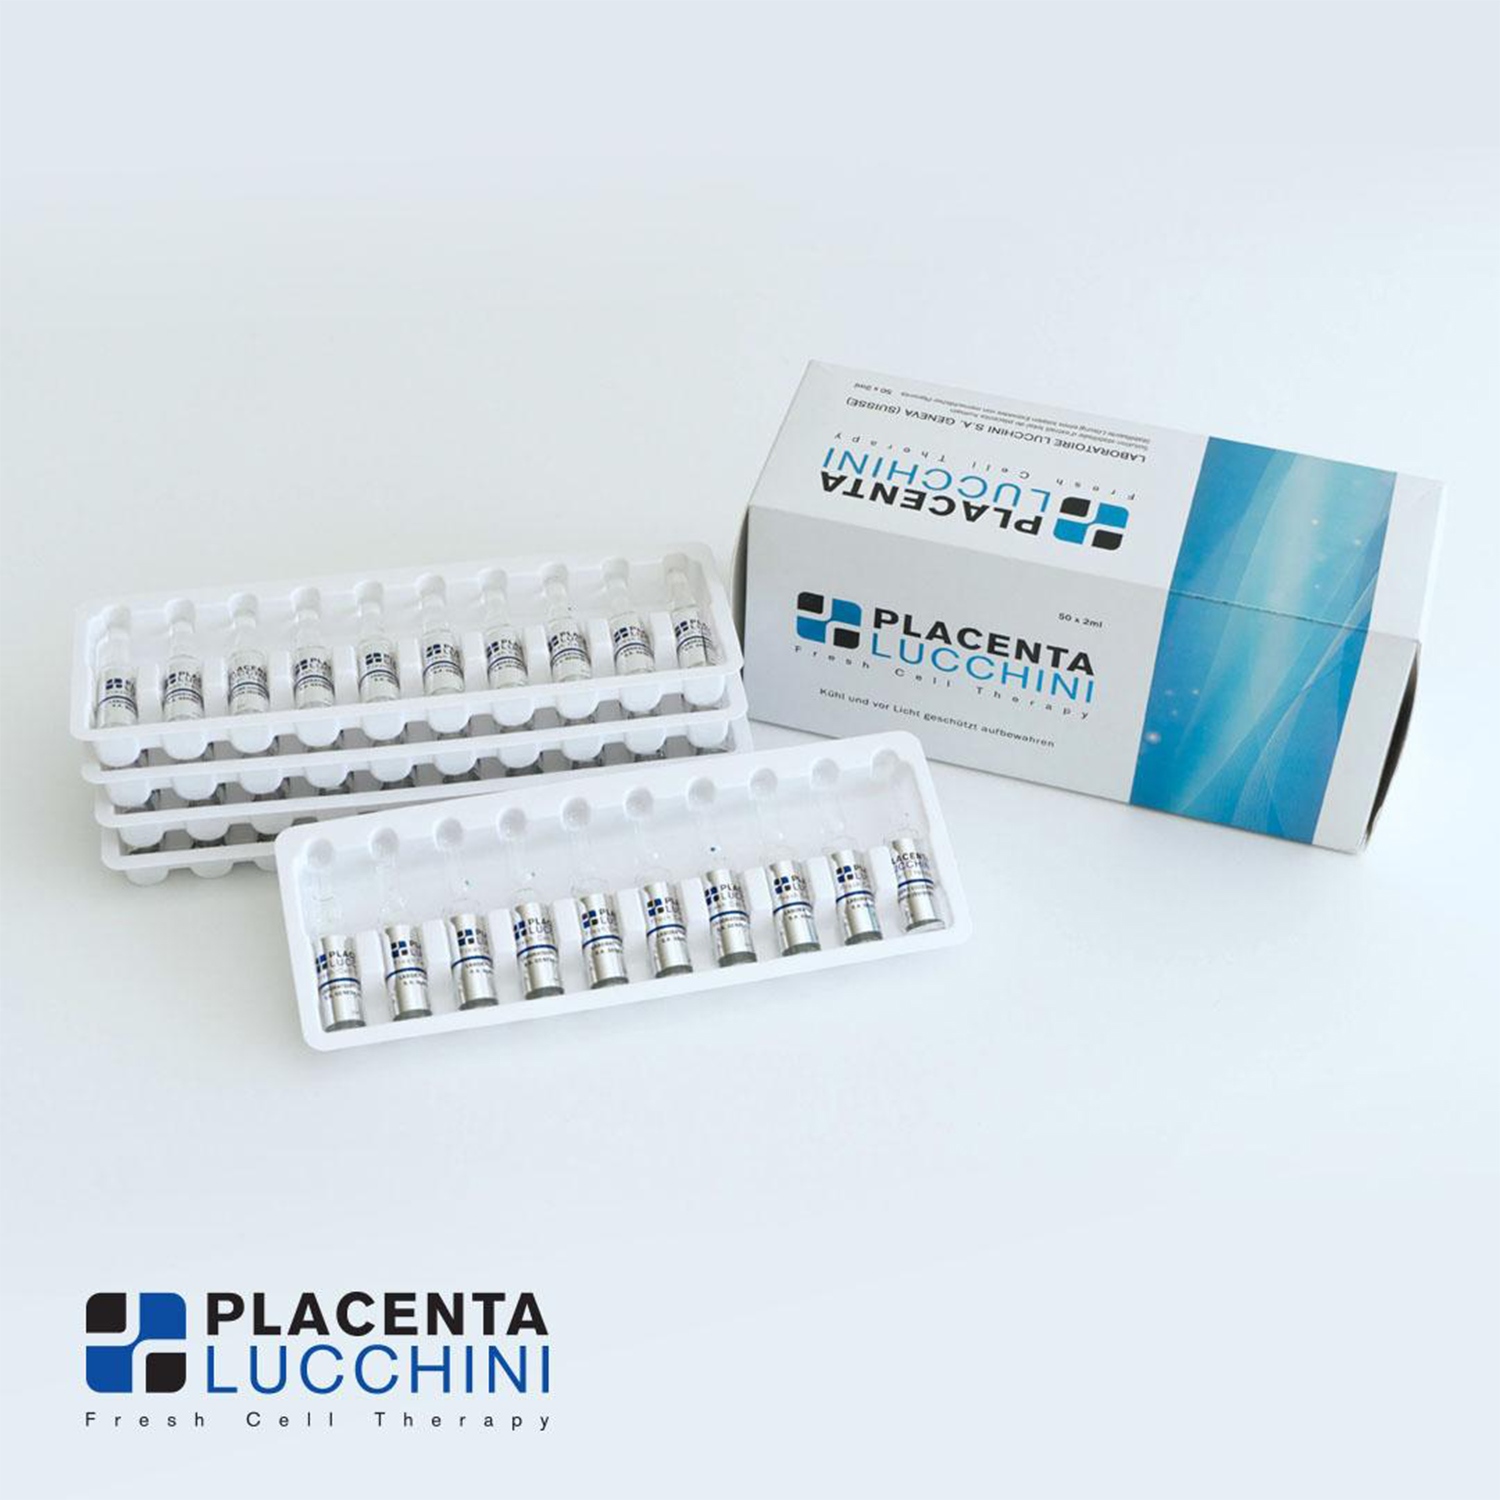 Lucchini Placenta Fresh Cell Therapy Injections